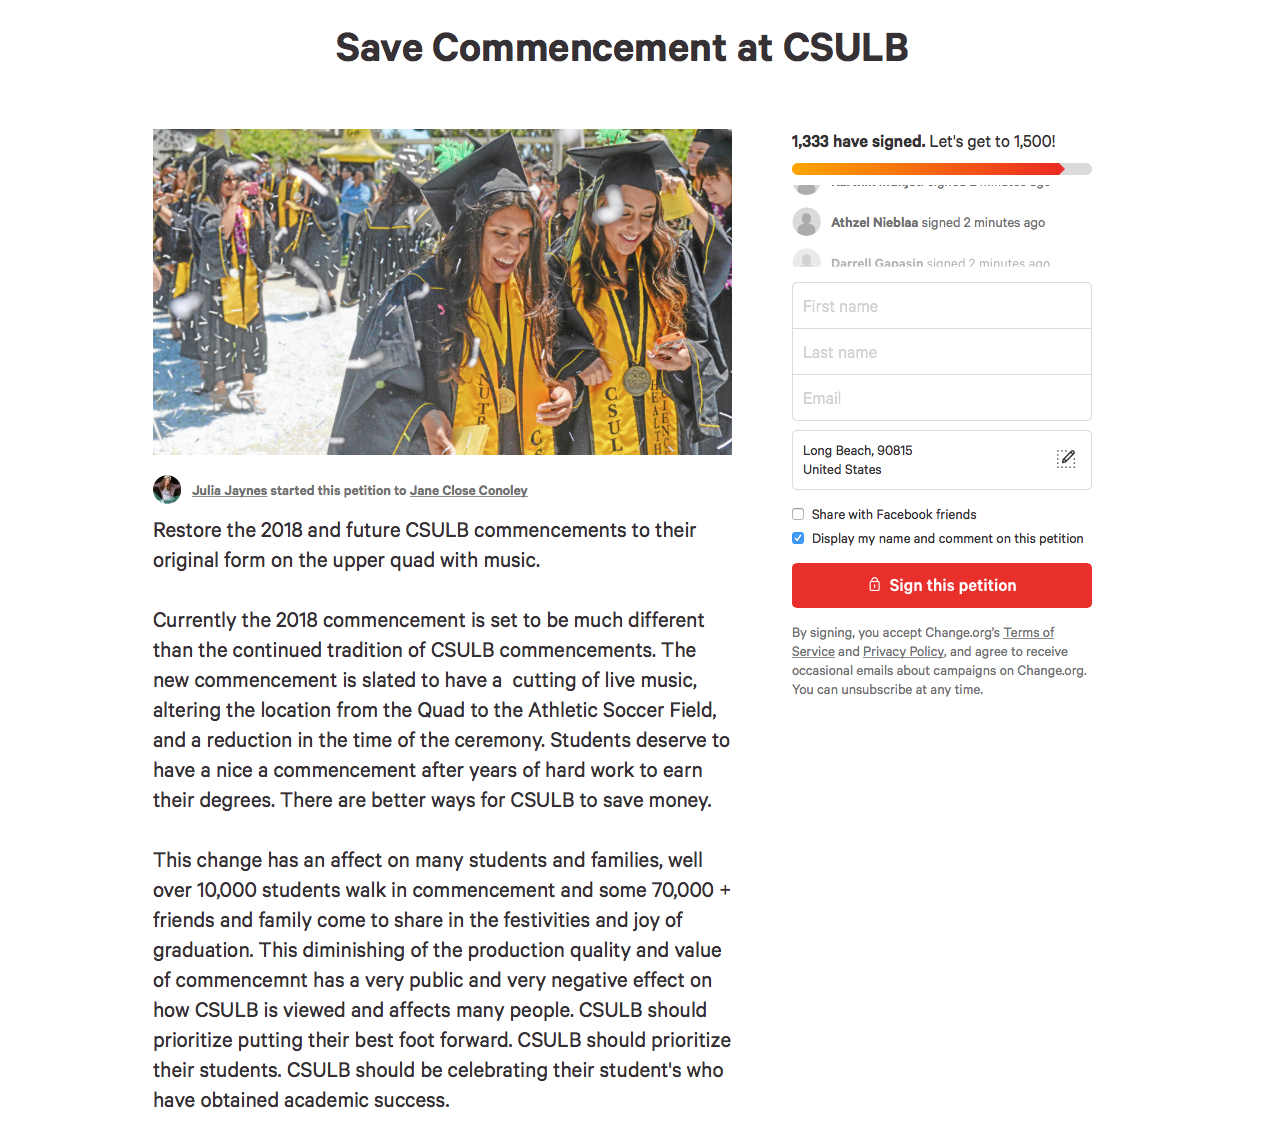 With confirmation from President Jane Close Conoley that the live band would not be present at the commencement stage for this spring’s graduating seniors, students set up a petition on Change.org to combat this decision. Currently, the petition has garned over 1,300 signatures.